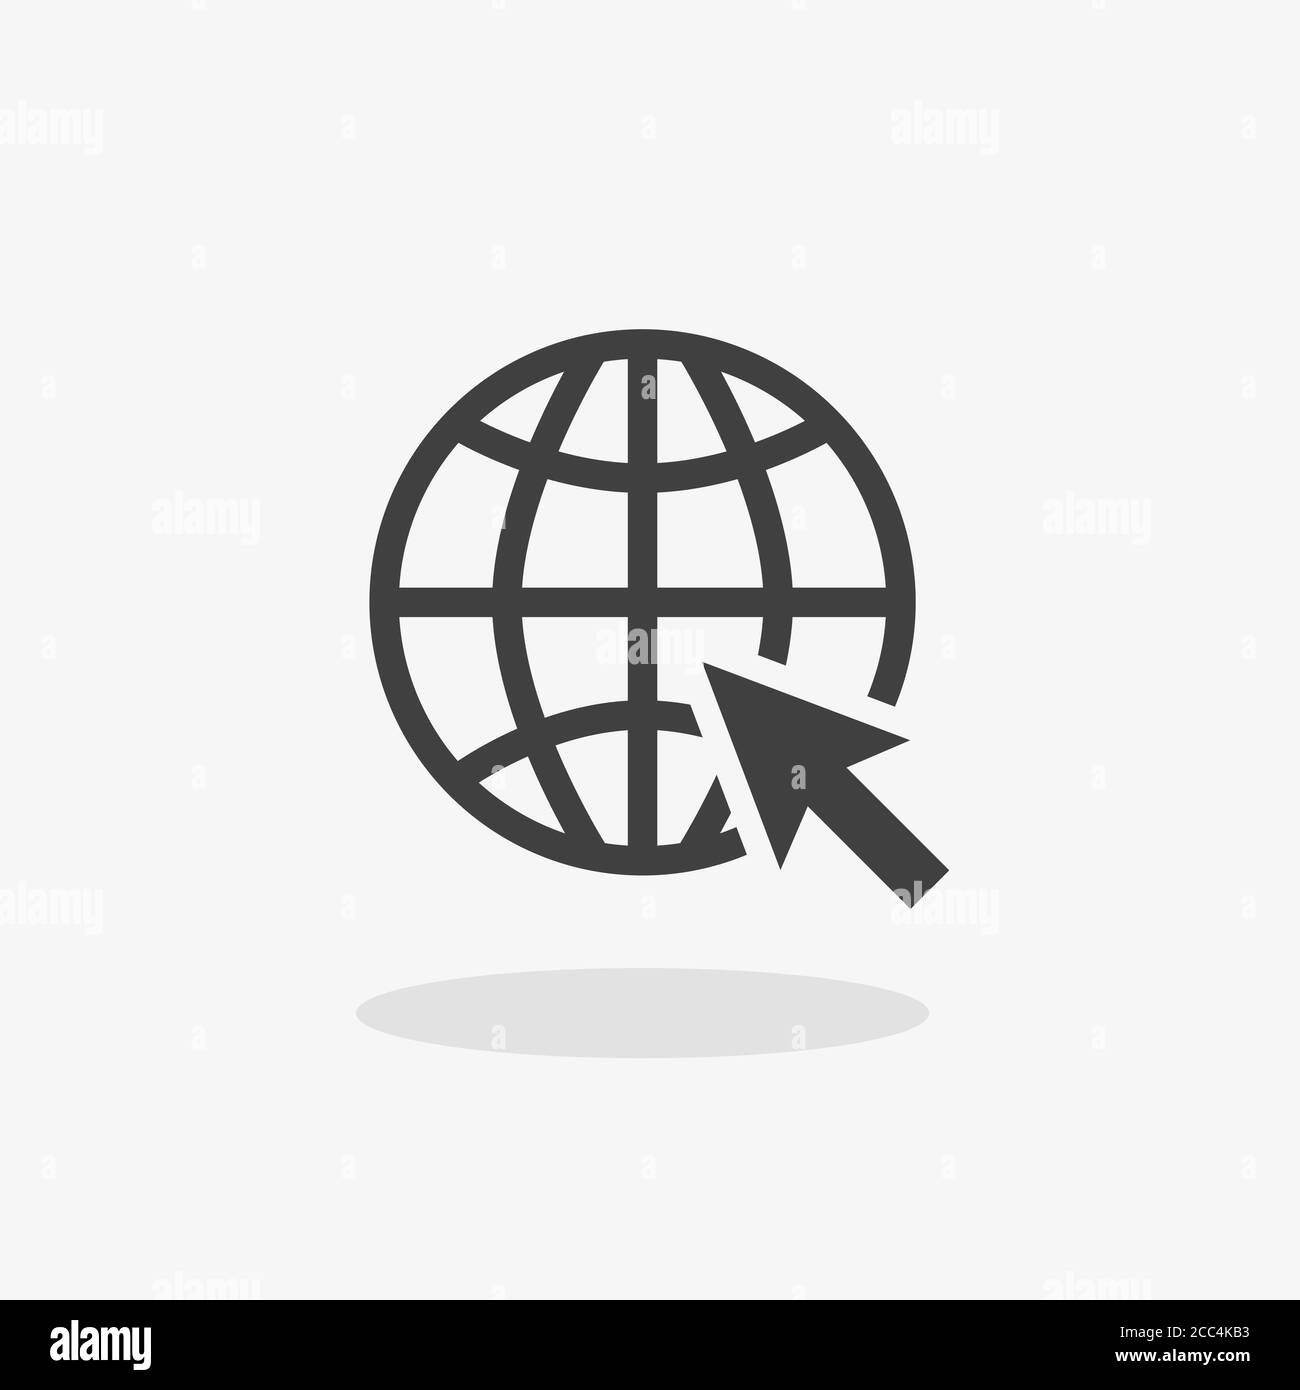 Illustration of the icon of the globe isolated on a white surface - concept: internet Stock Photo